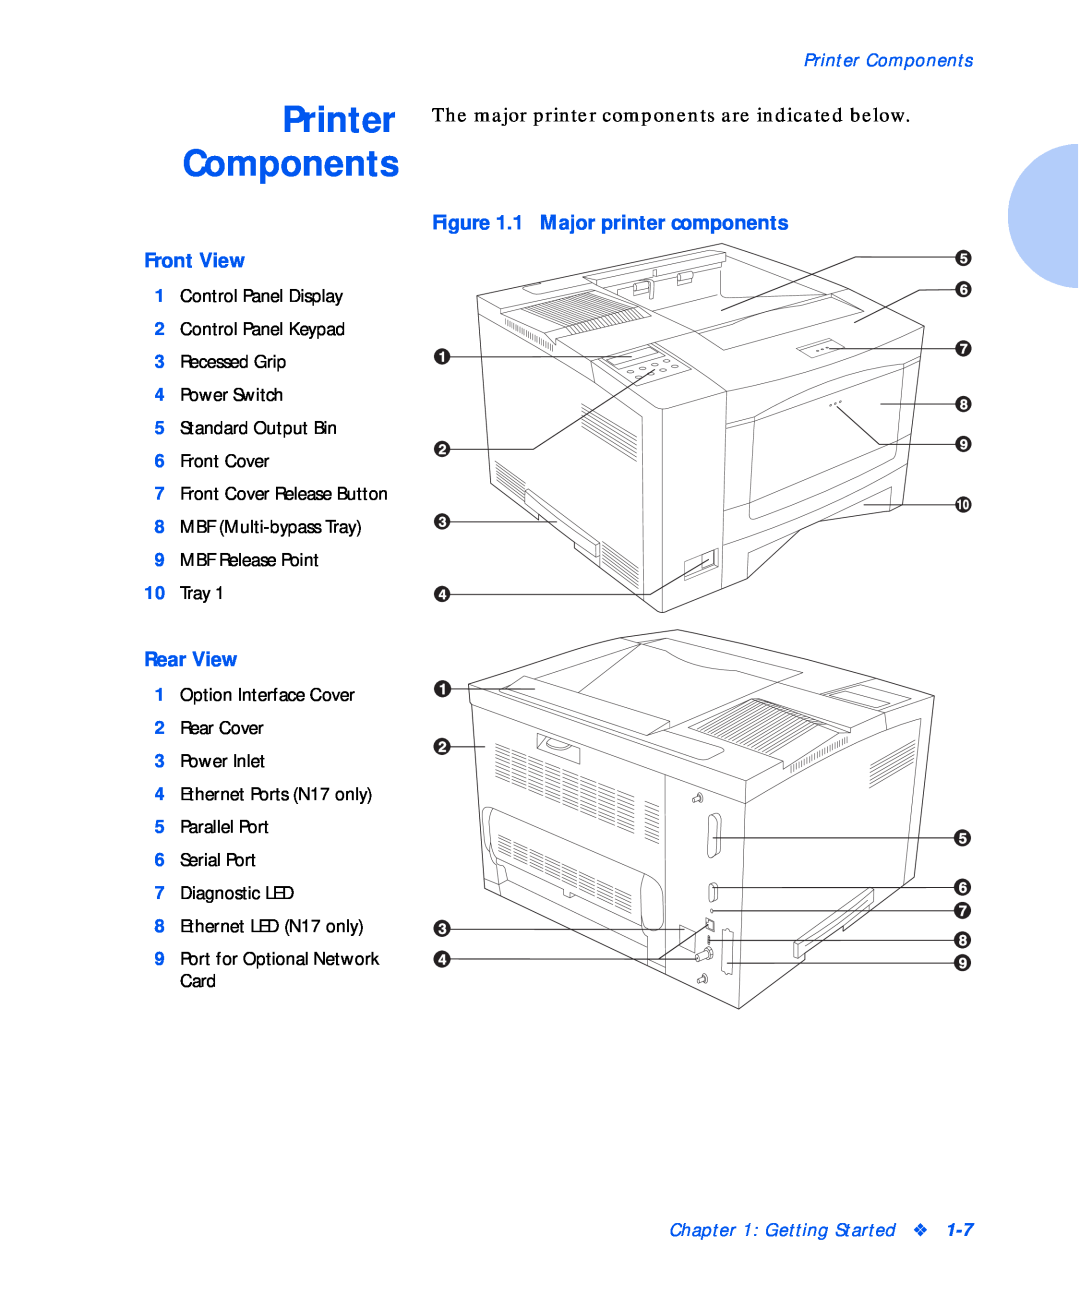 Xerox N17b manual Printer Components, Front View, Rear View, 1 Major printer components, Getting Started 